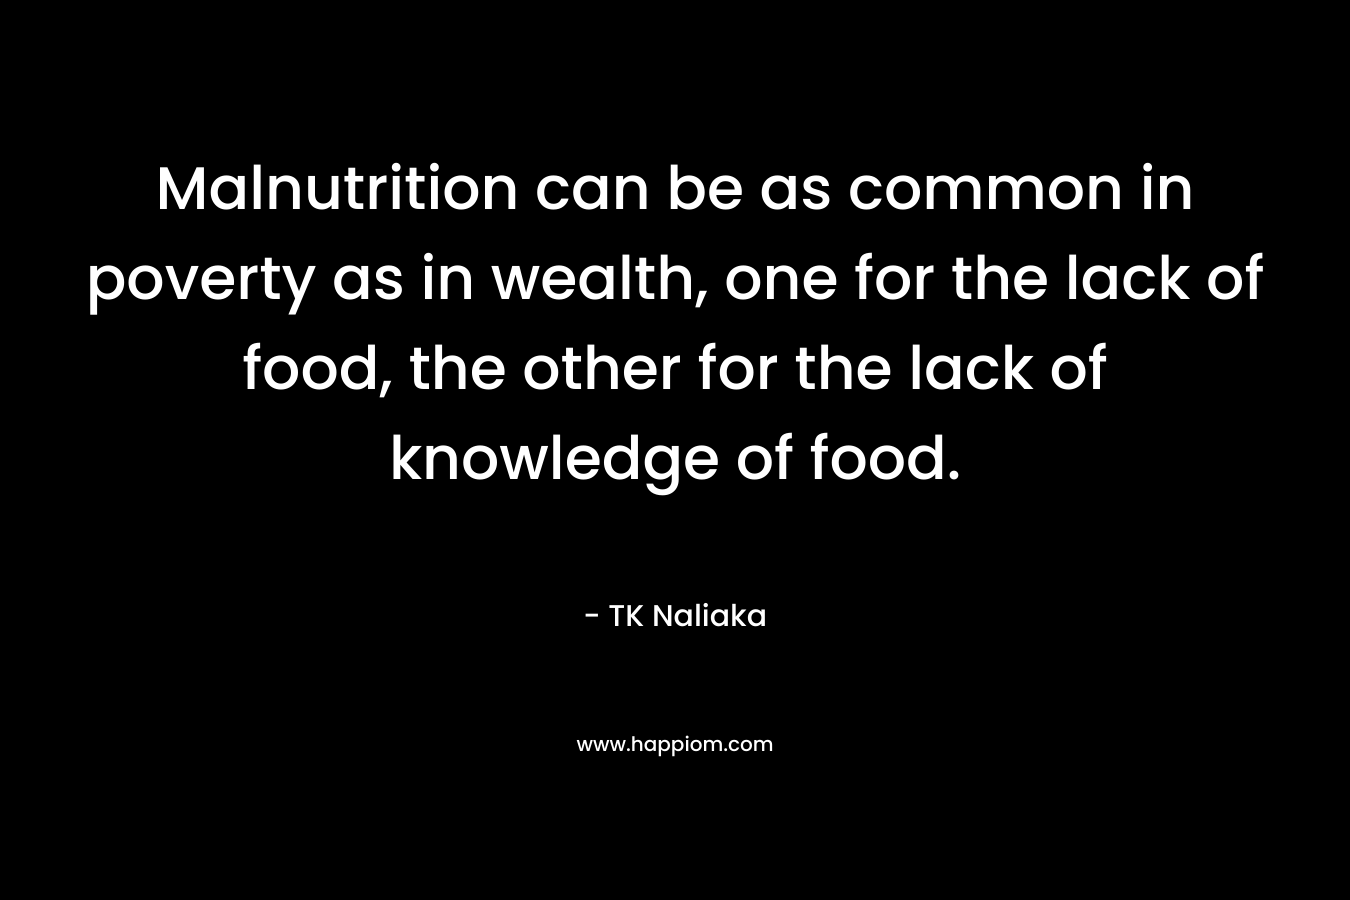 Malnutrition can be as common in poverty as in wealth, one for the lack of food, the other for the lack of knowledge of food. – TK Naliaka